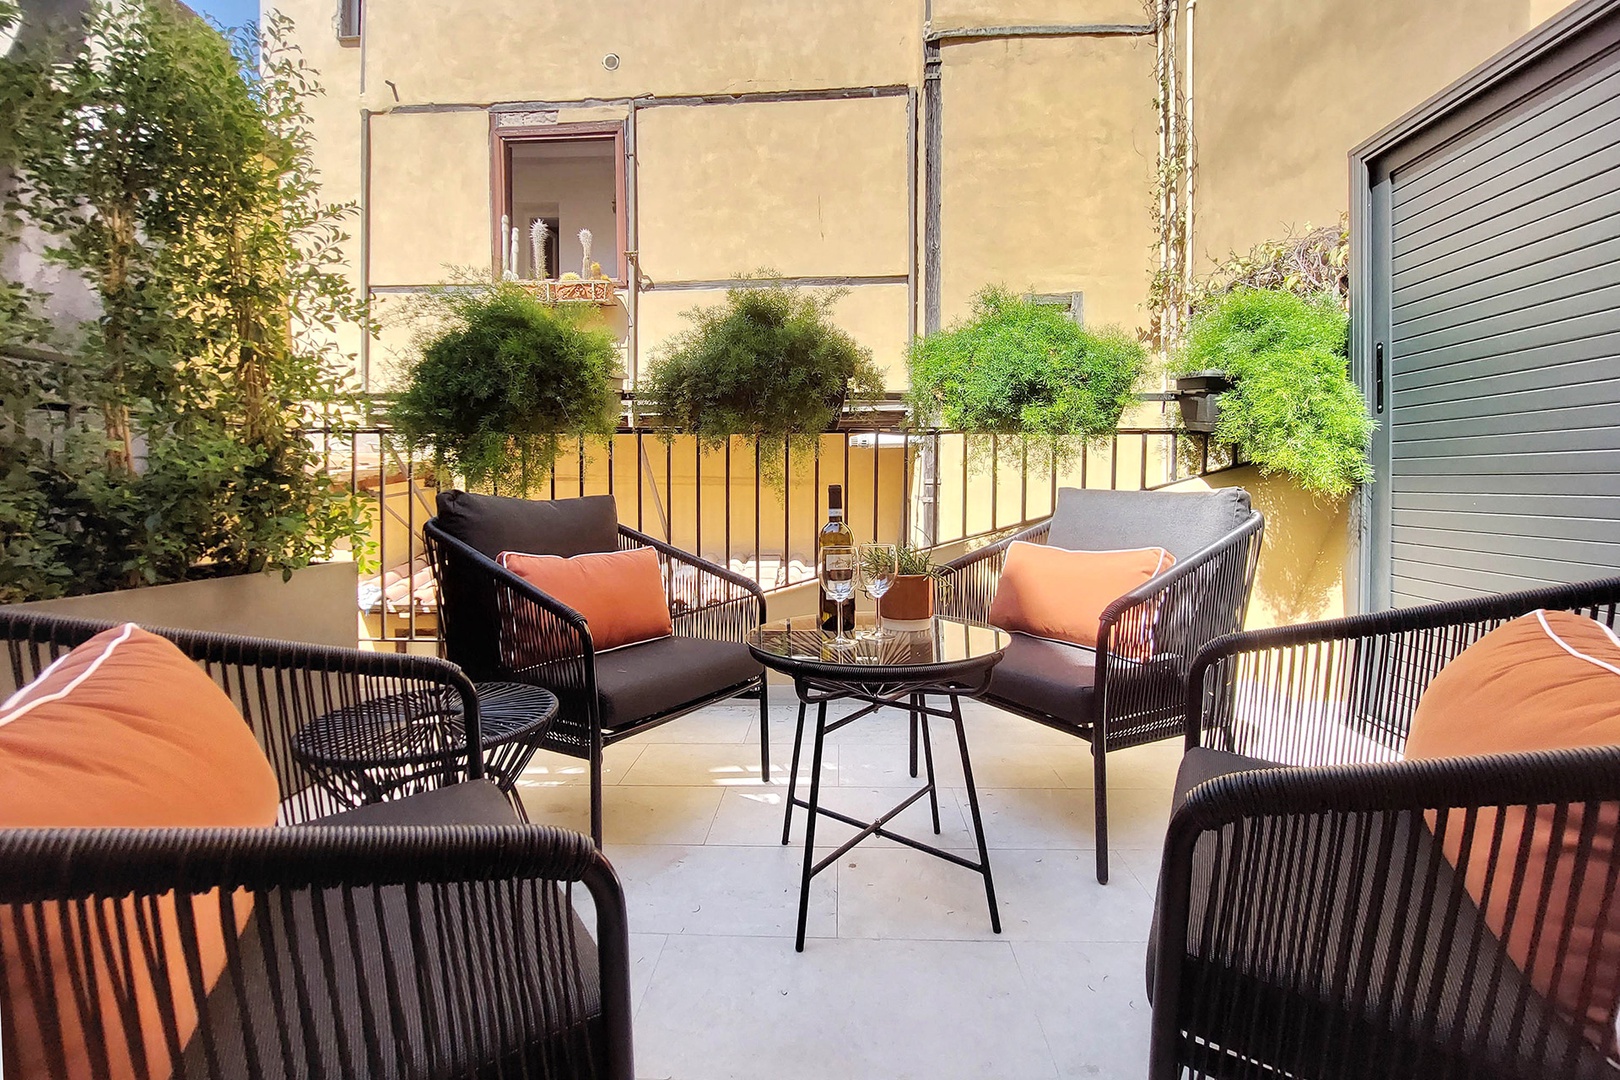 The terrace is a perfect spot to gather for a glass of wine.